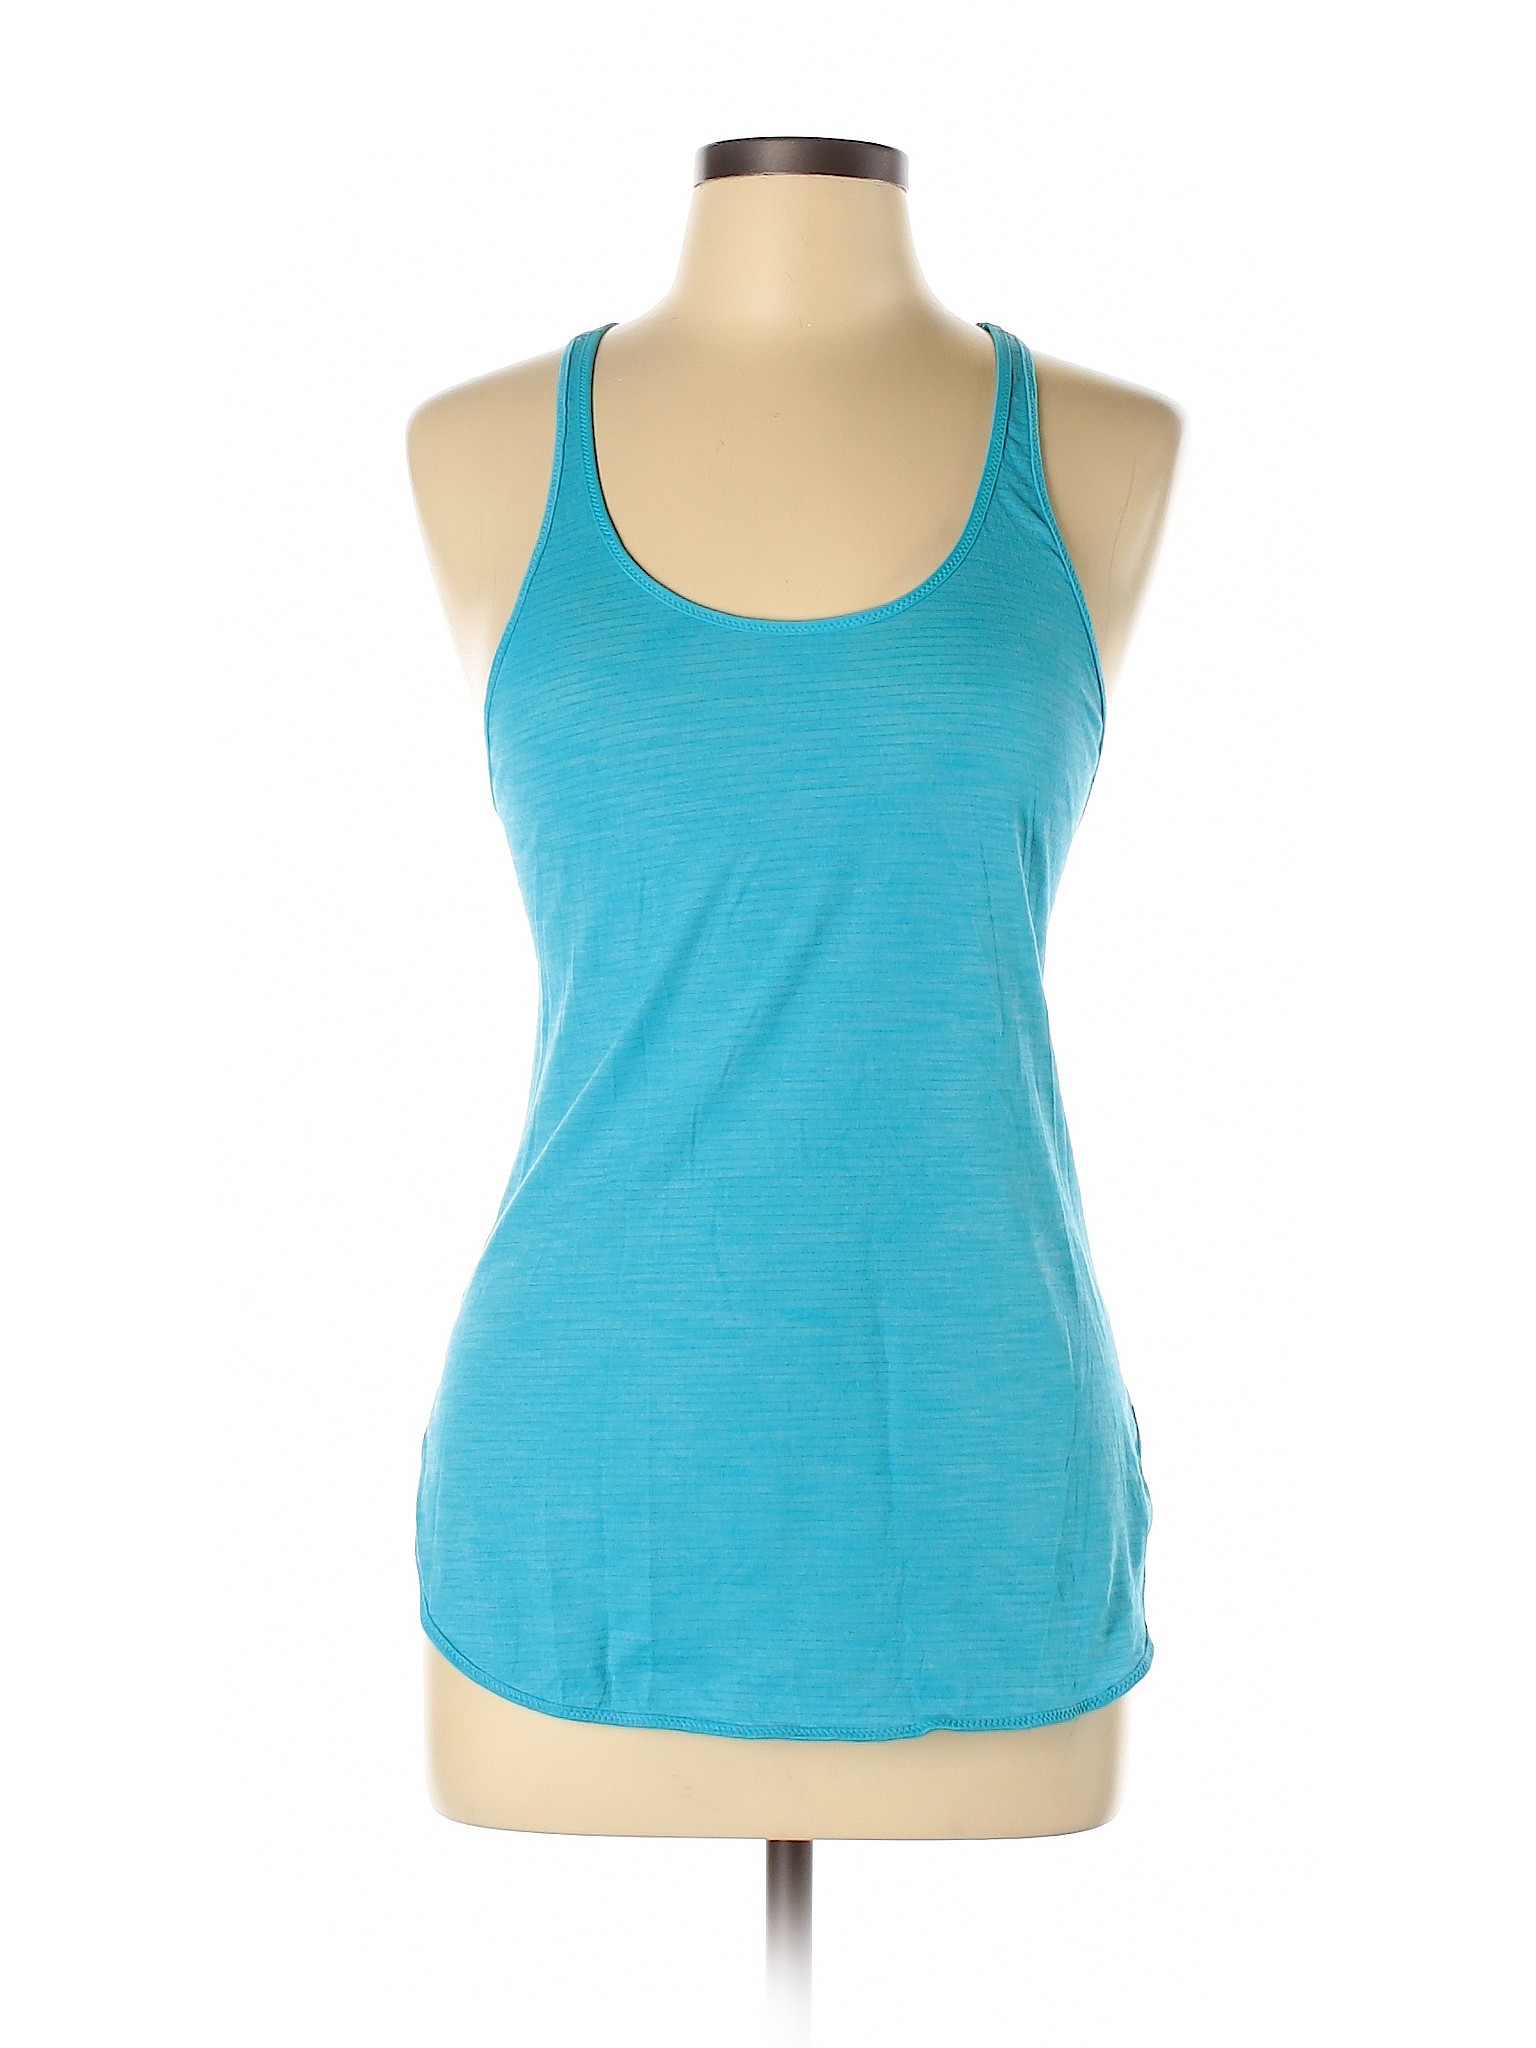 Pre-Owned Lululemon Athletica Womens Size 8 Tank Top India